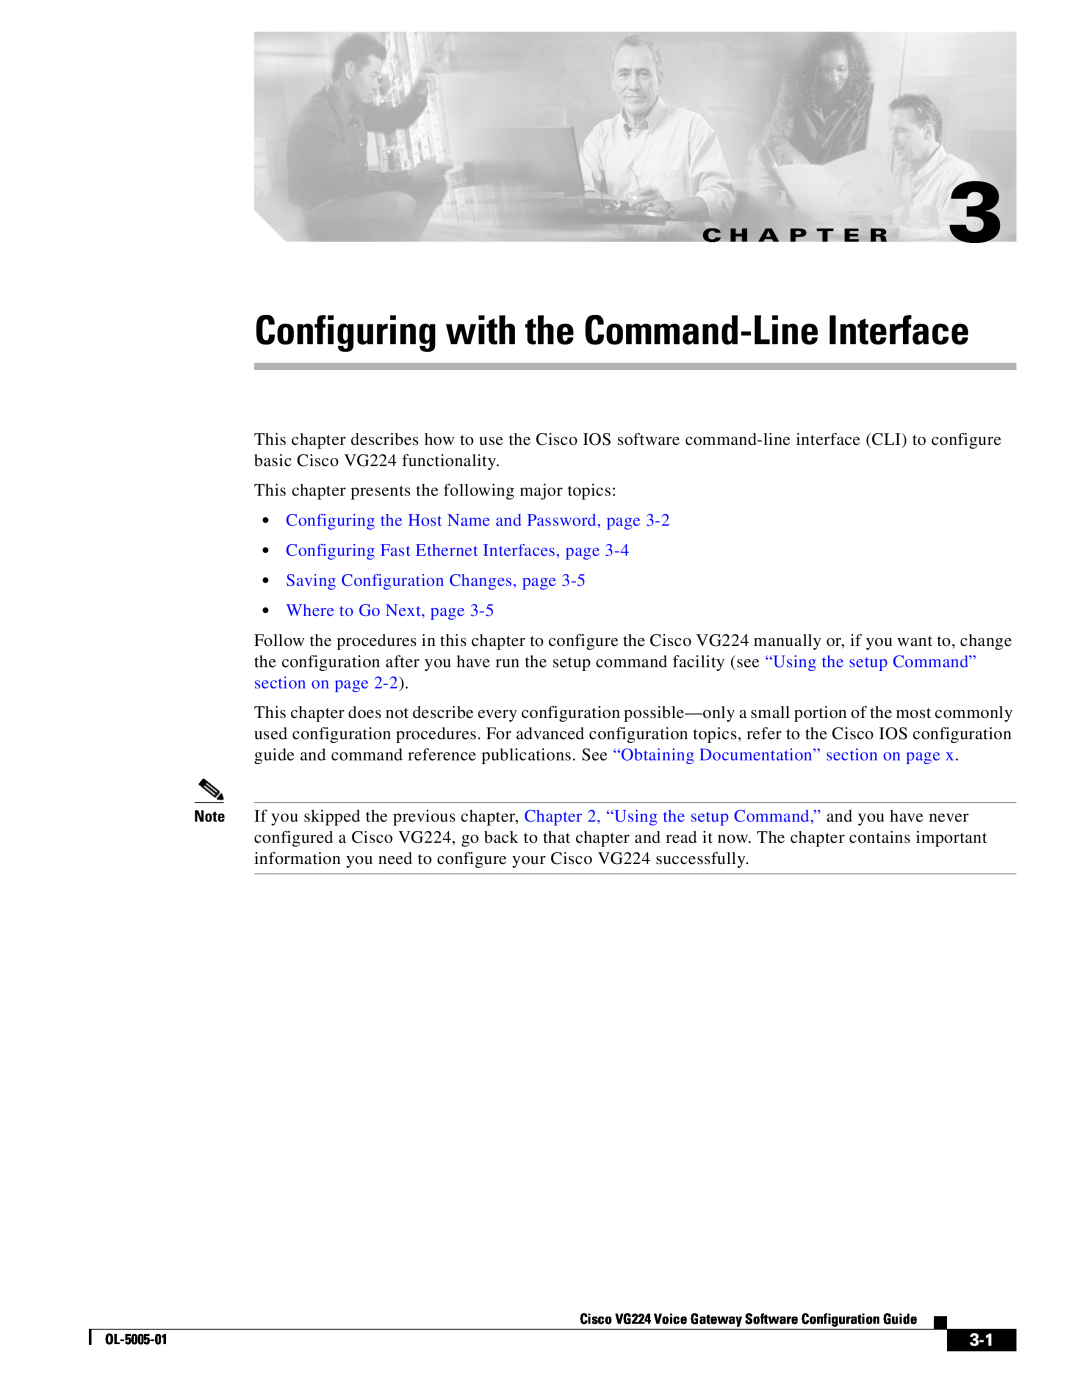 Cisco Systems VG224 manual Configuring with the Command-Line Interface, Configuring the Host Name and Password, page 